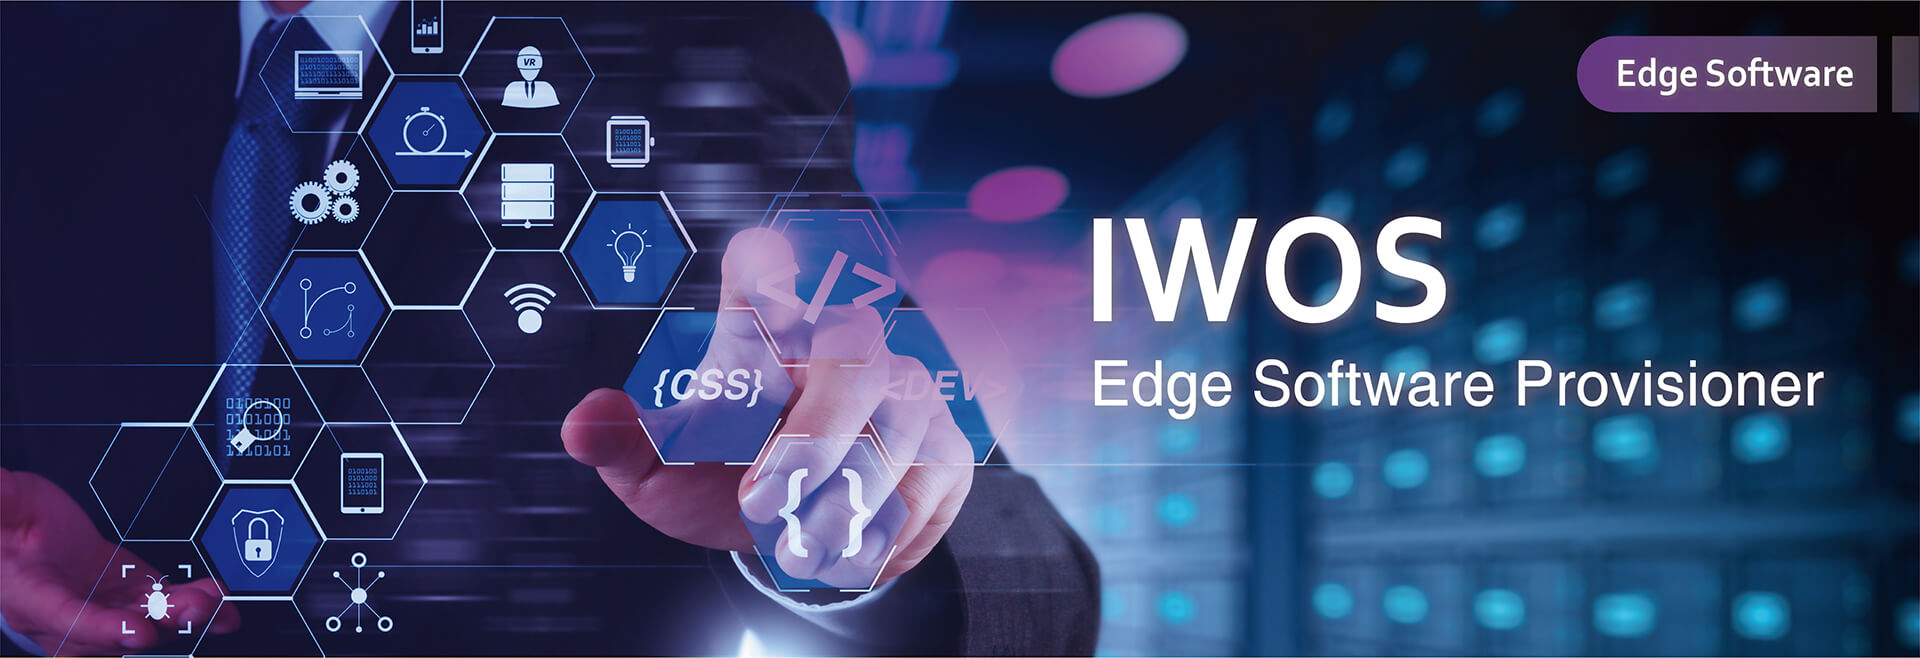 IWOS-Banner-Edge-Software-Provisioner